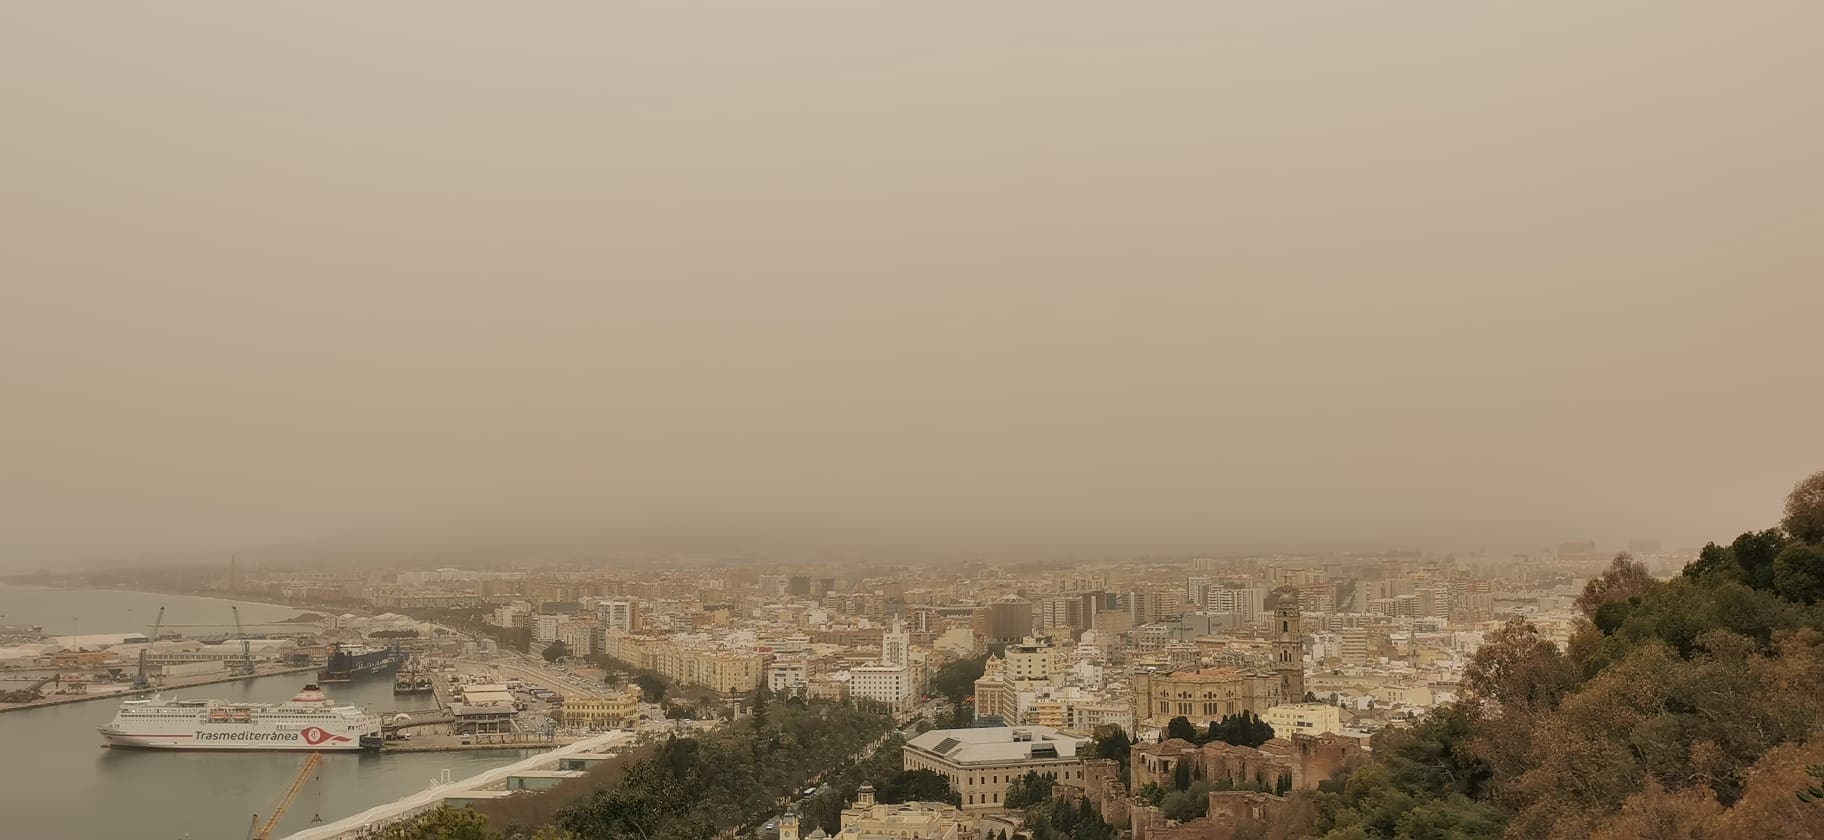 The rain brought with it Saharan dust, in suspension